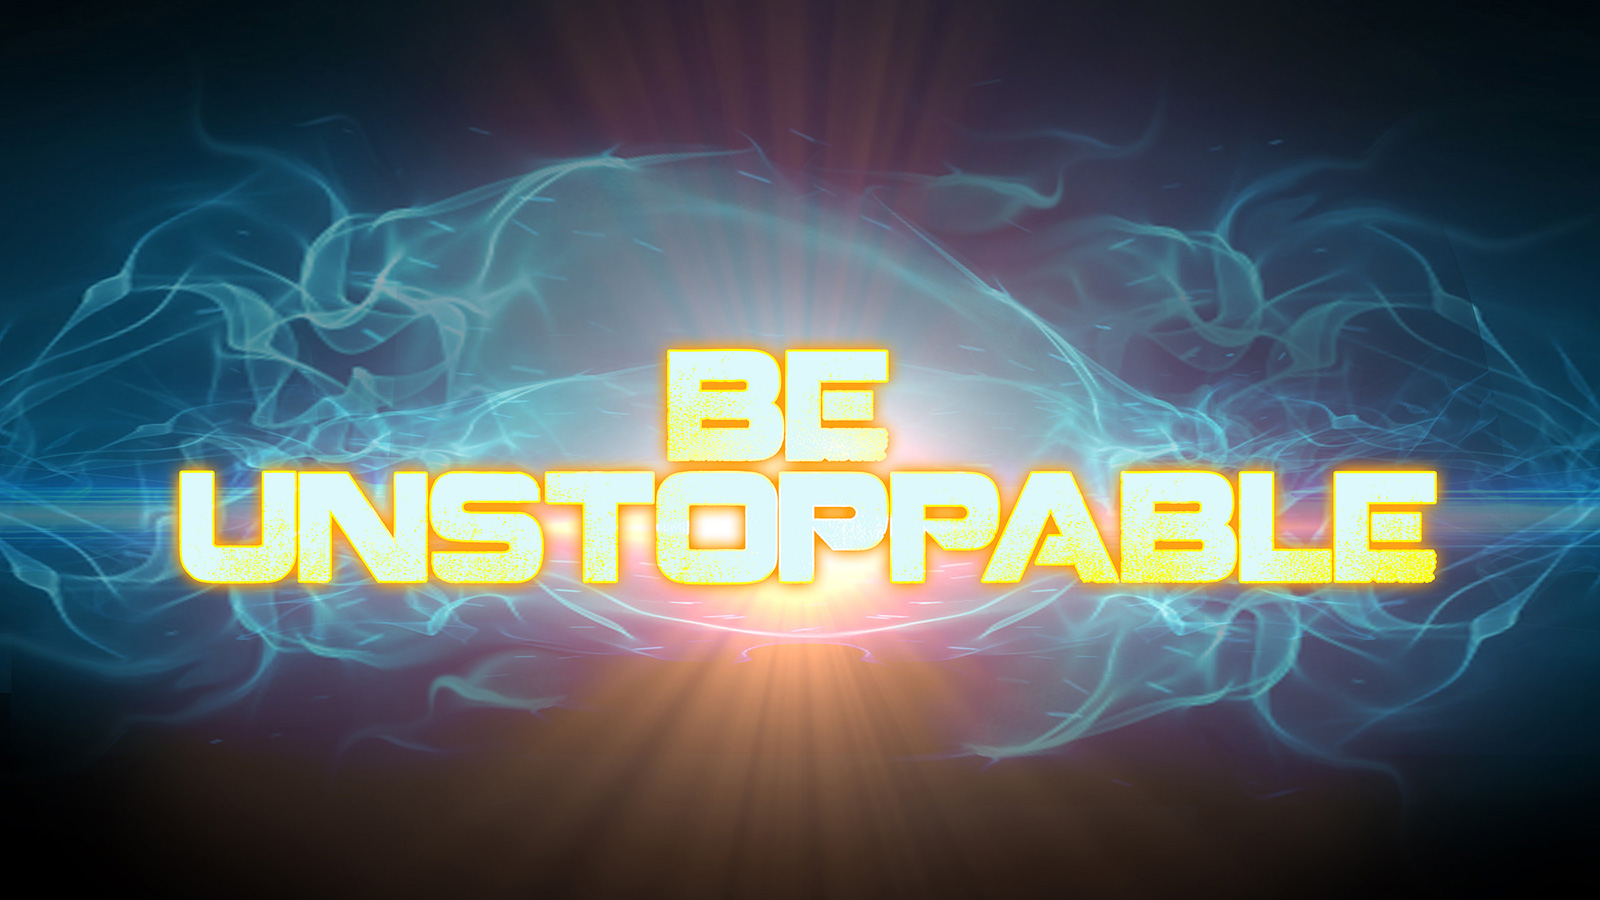 Be Unstoppable Illustration by Anthony Colonna